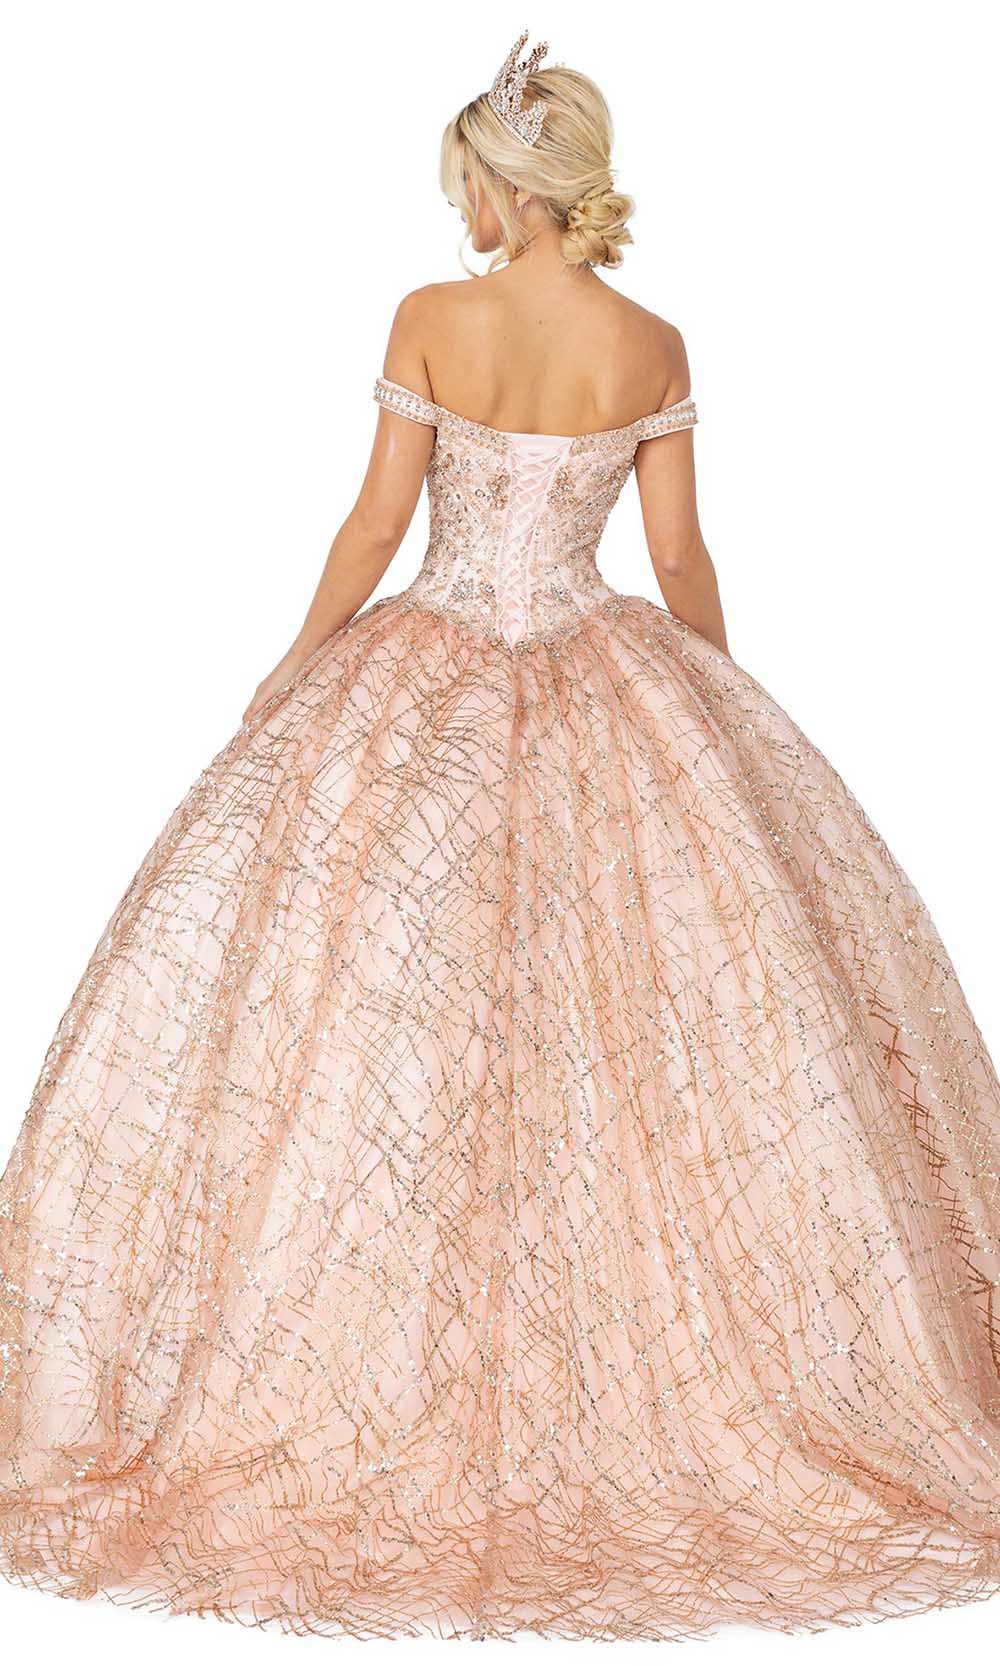 Dancing Queen - 1570 Jeweled Glitter Ballgown In Champagne and Gold